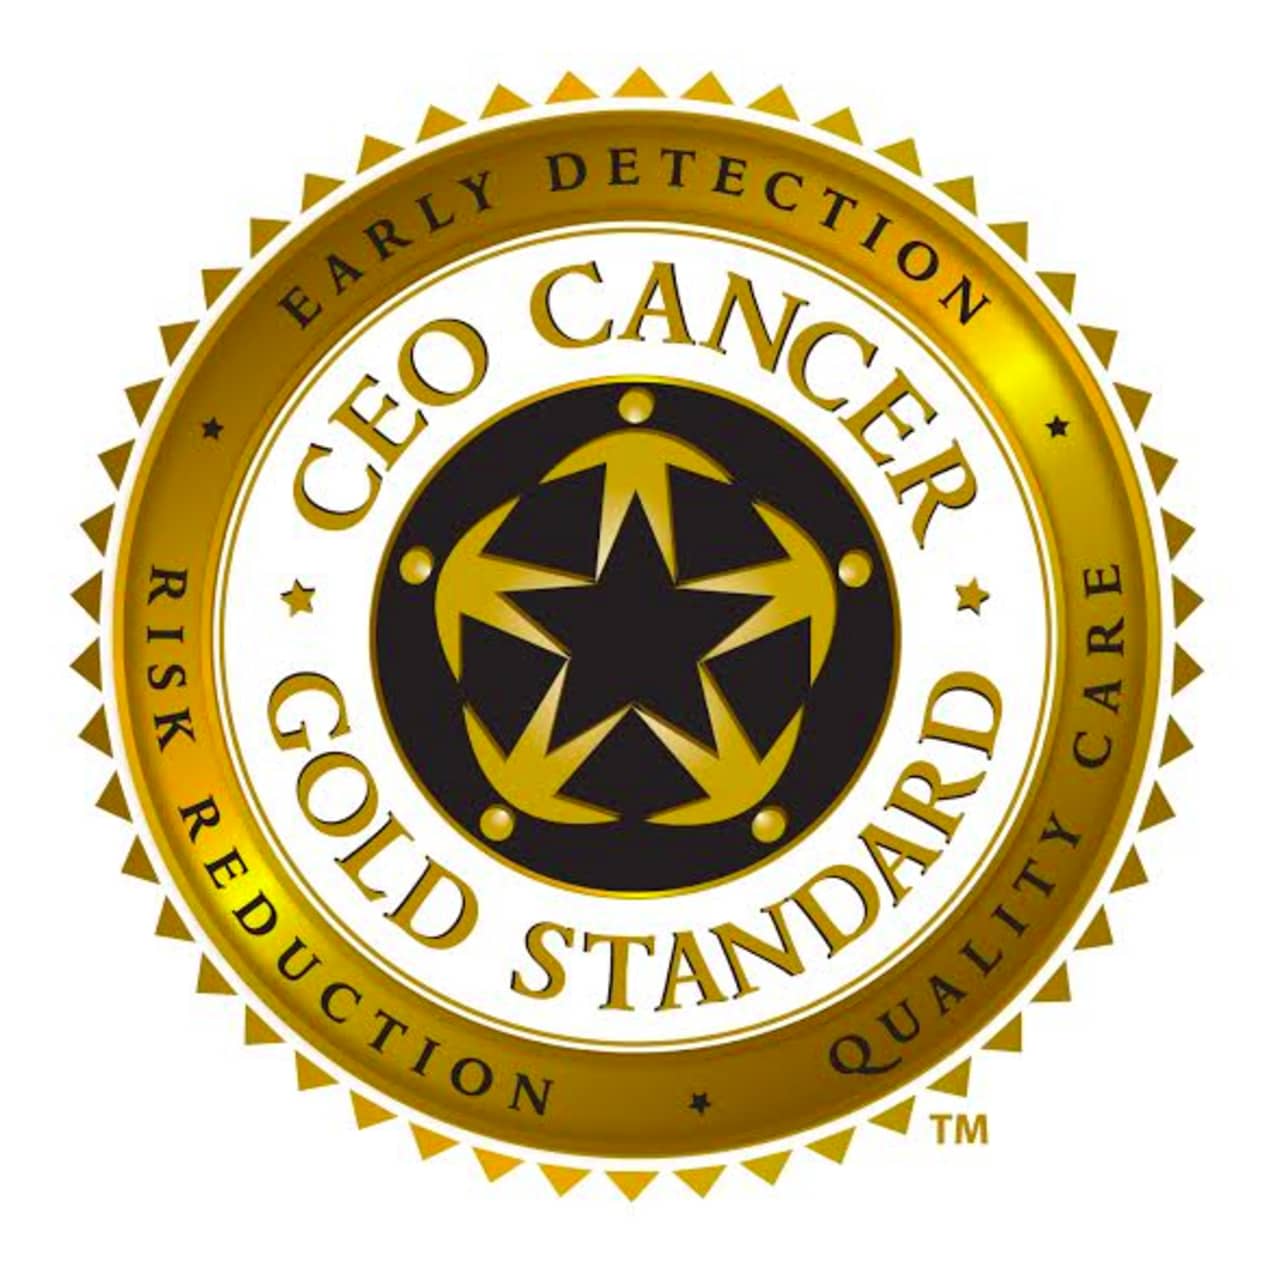 White Plains Hospital received CEO Cancer Gold Standard accreditation thanks to its treatment of cancer in the workplace. This is the second year in a row they have received the award.